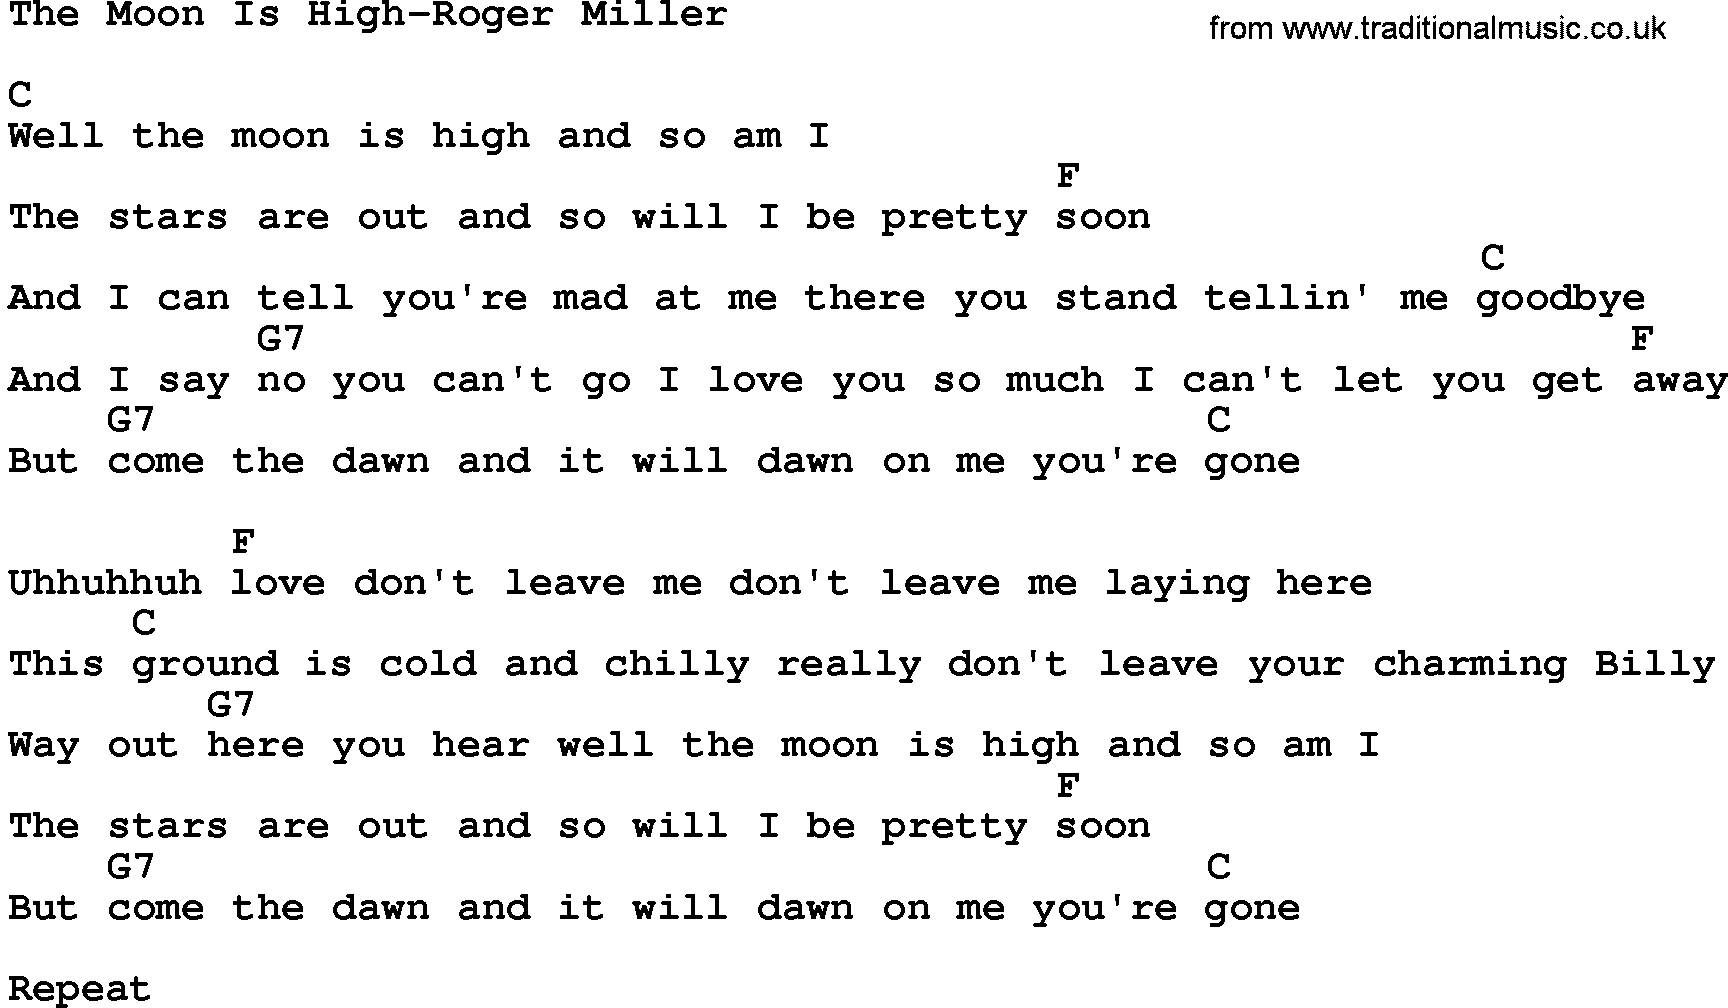 Country music song: The Moon Is High-Roger Miller lyrics and chords